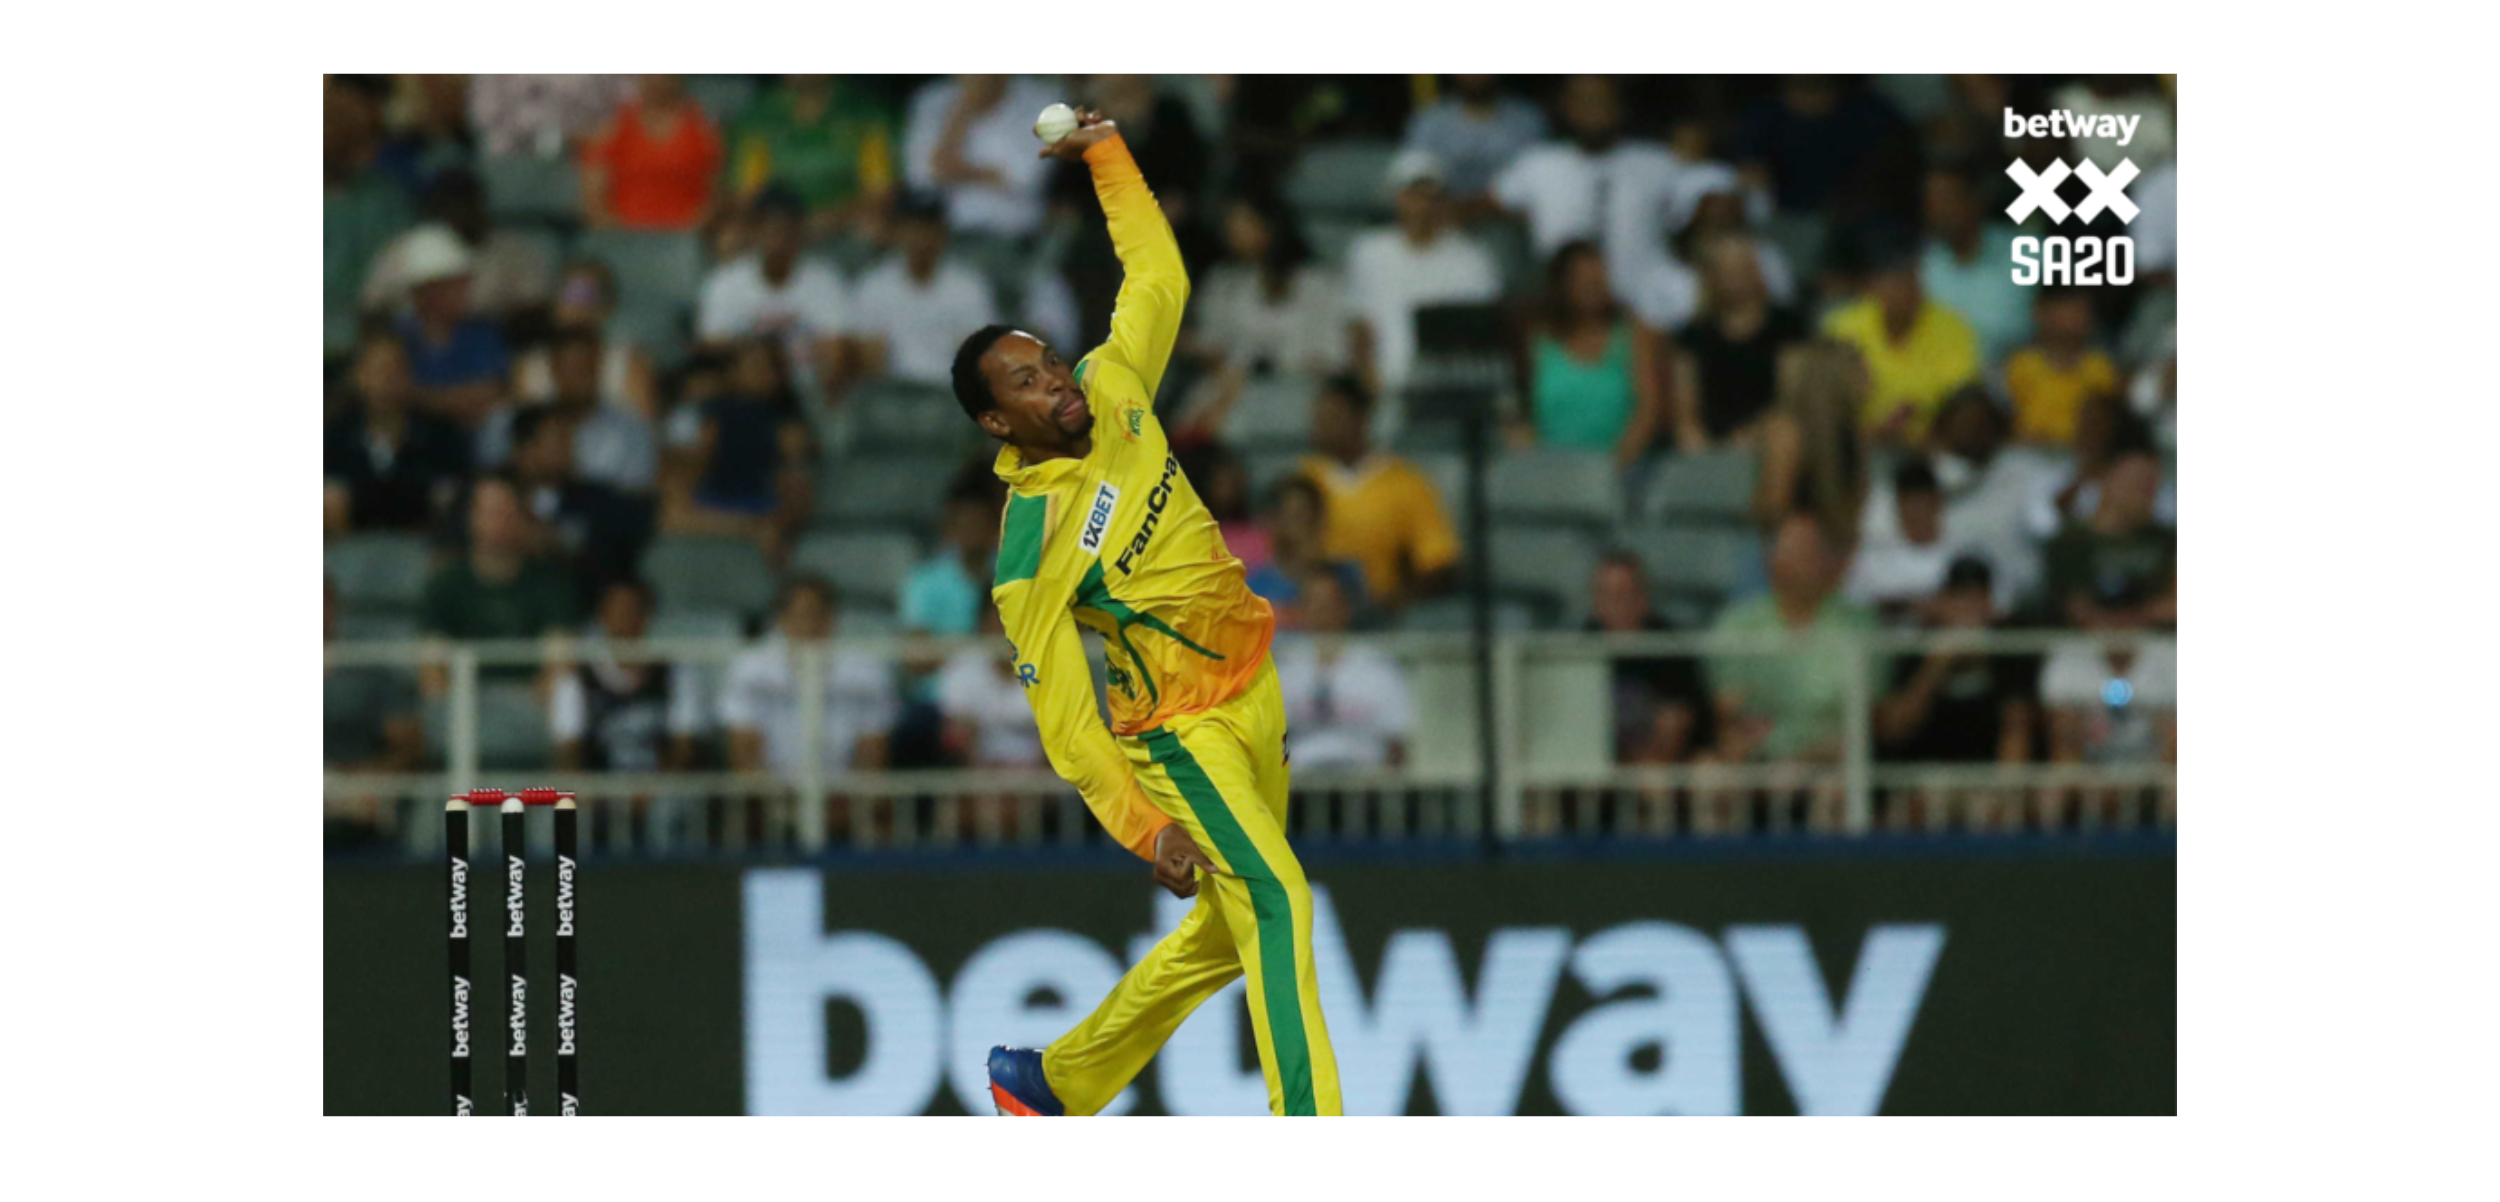 SA20 League: Phangiso suspended from bowling in Betway SA20